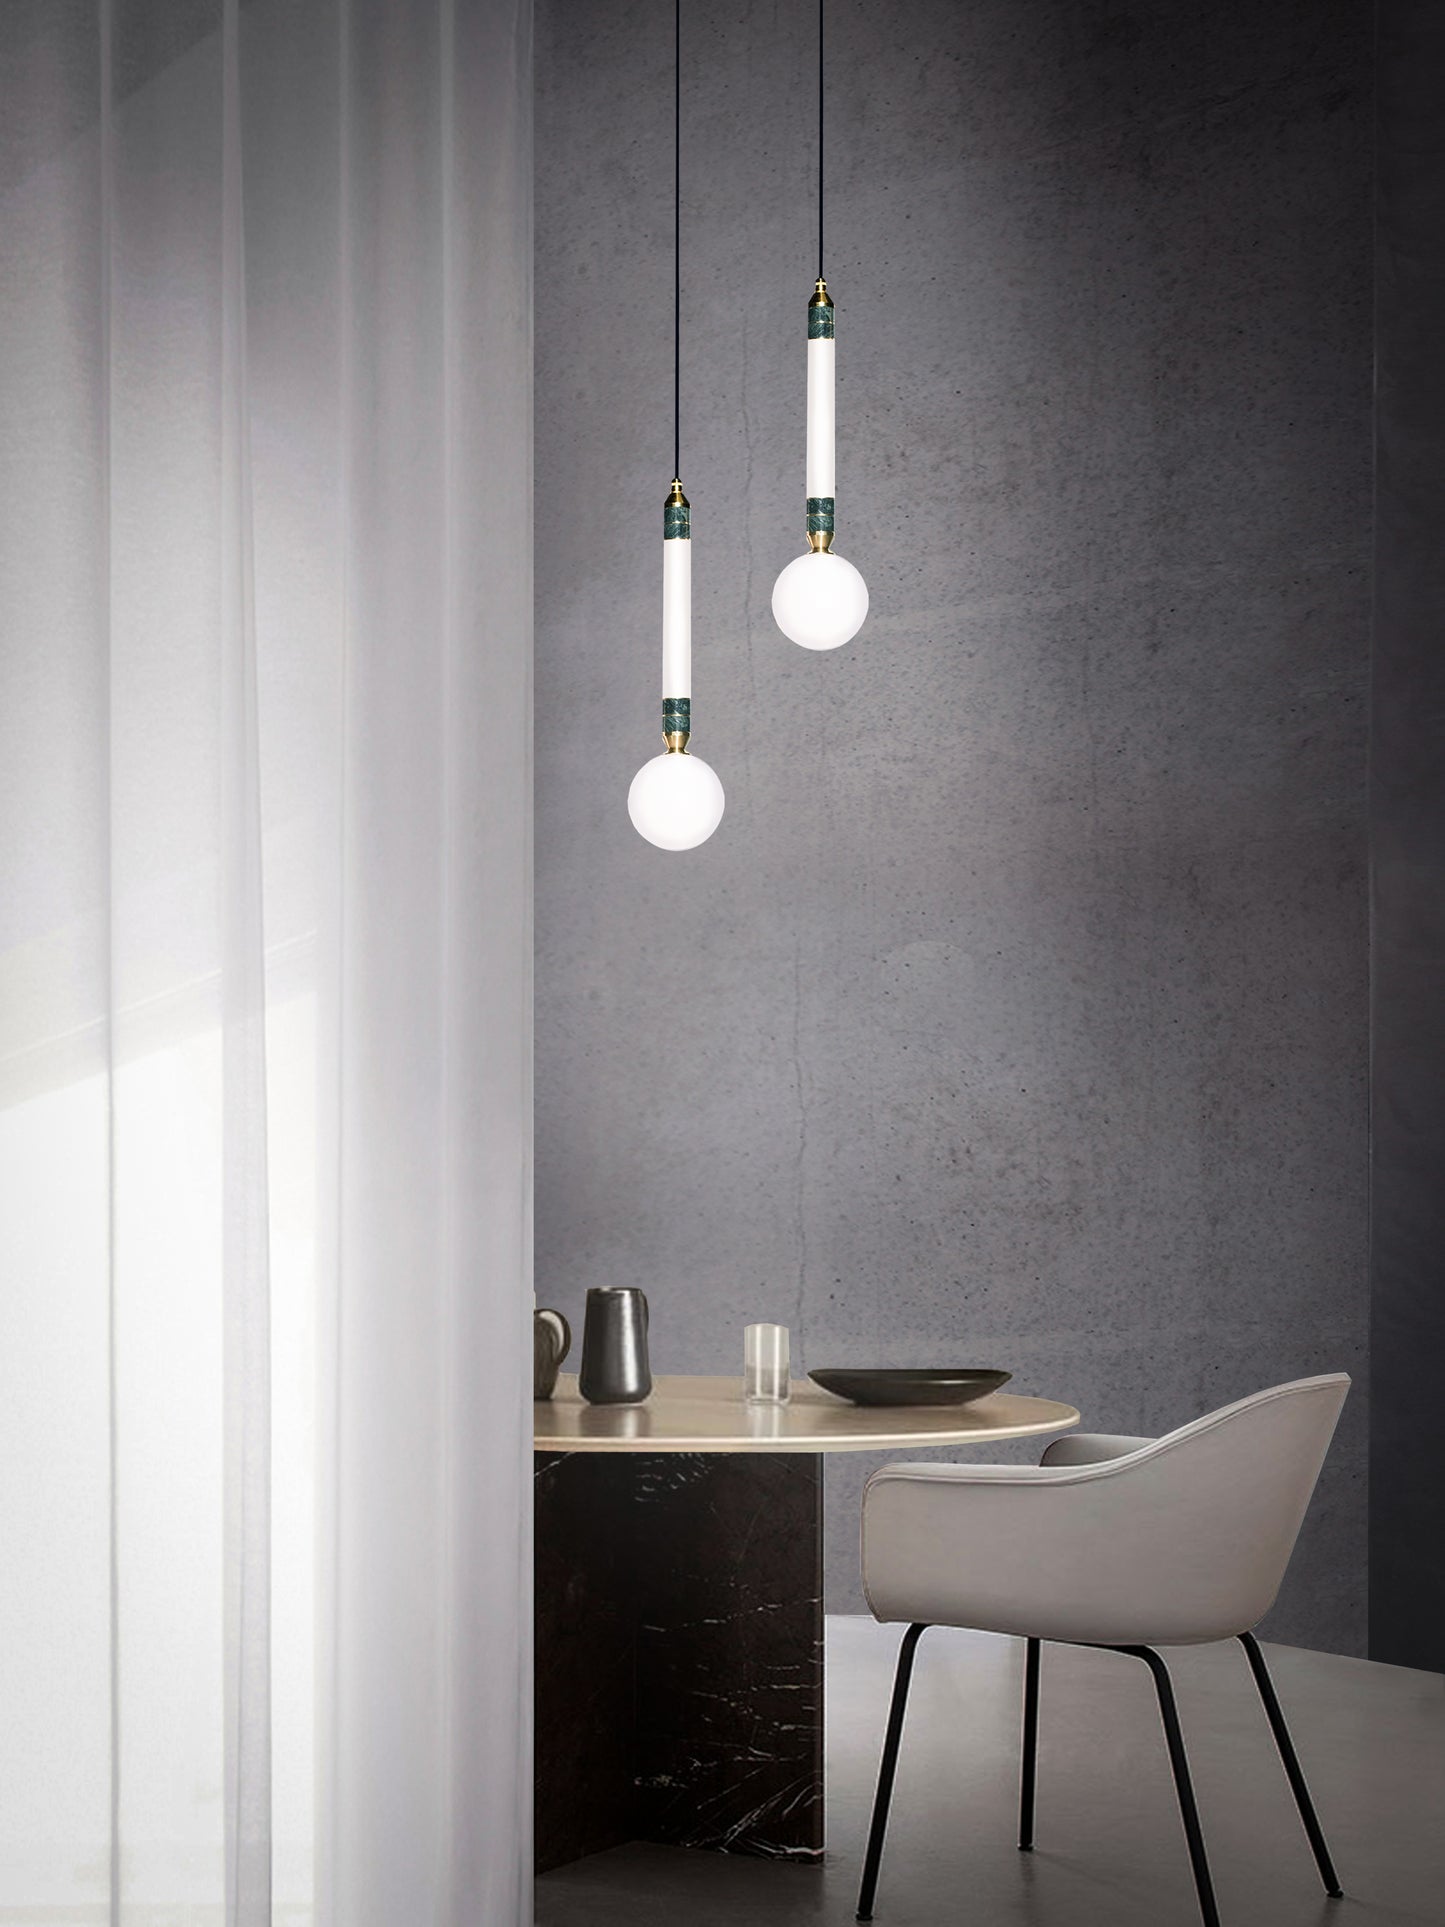 Greenstone Small Pendant Light, hanging from ceiling above table.